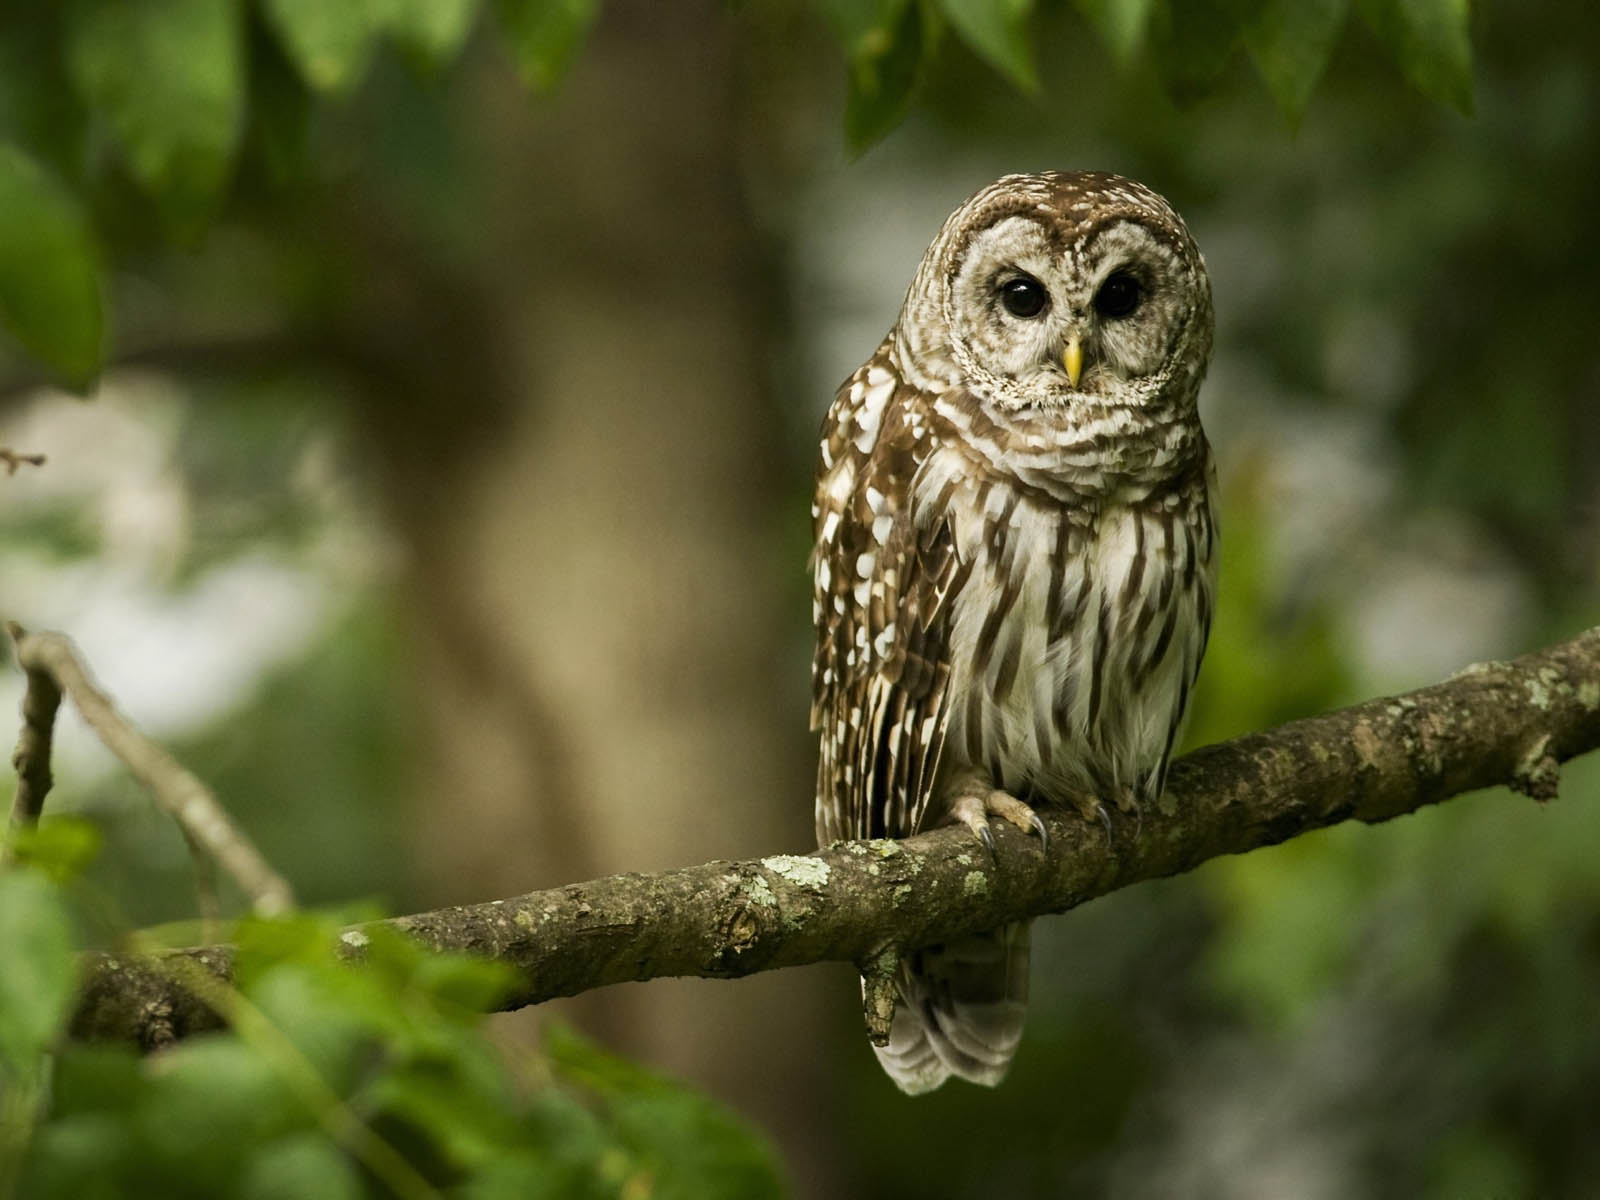 A picture of an owl.